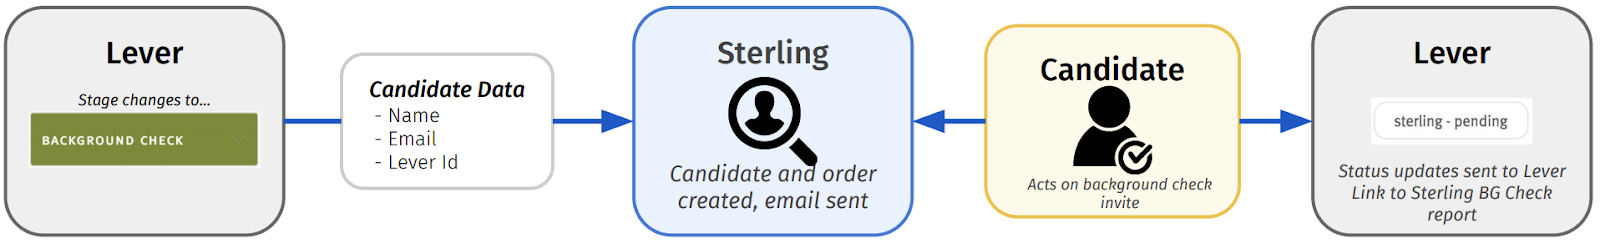 Workflow diagram between sterling and Lever